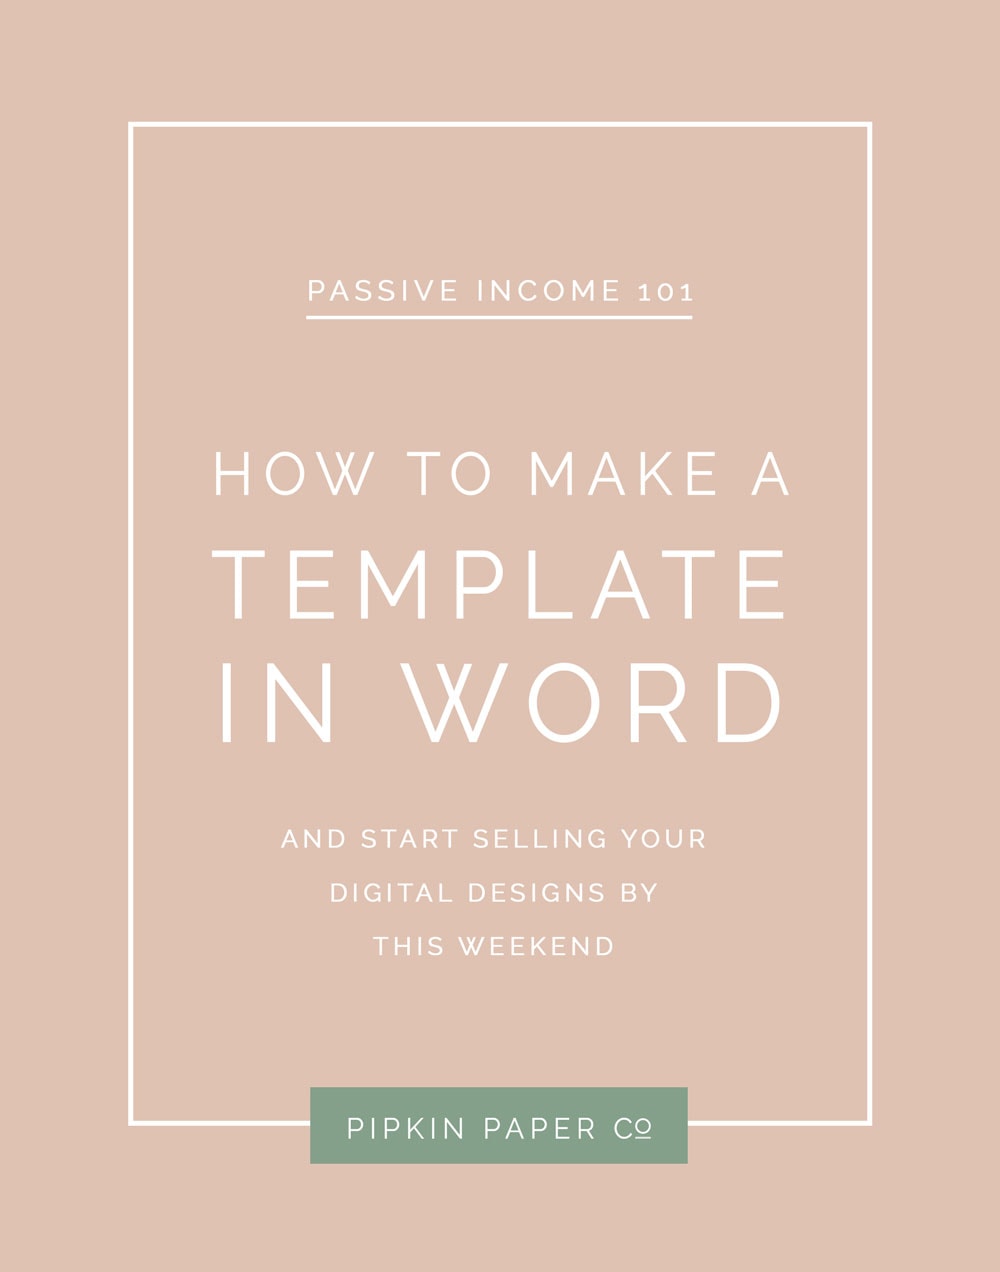 how-to-make-a-template-in-word-passive-income-101-part-2-pipkin